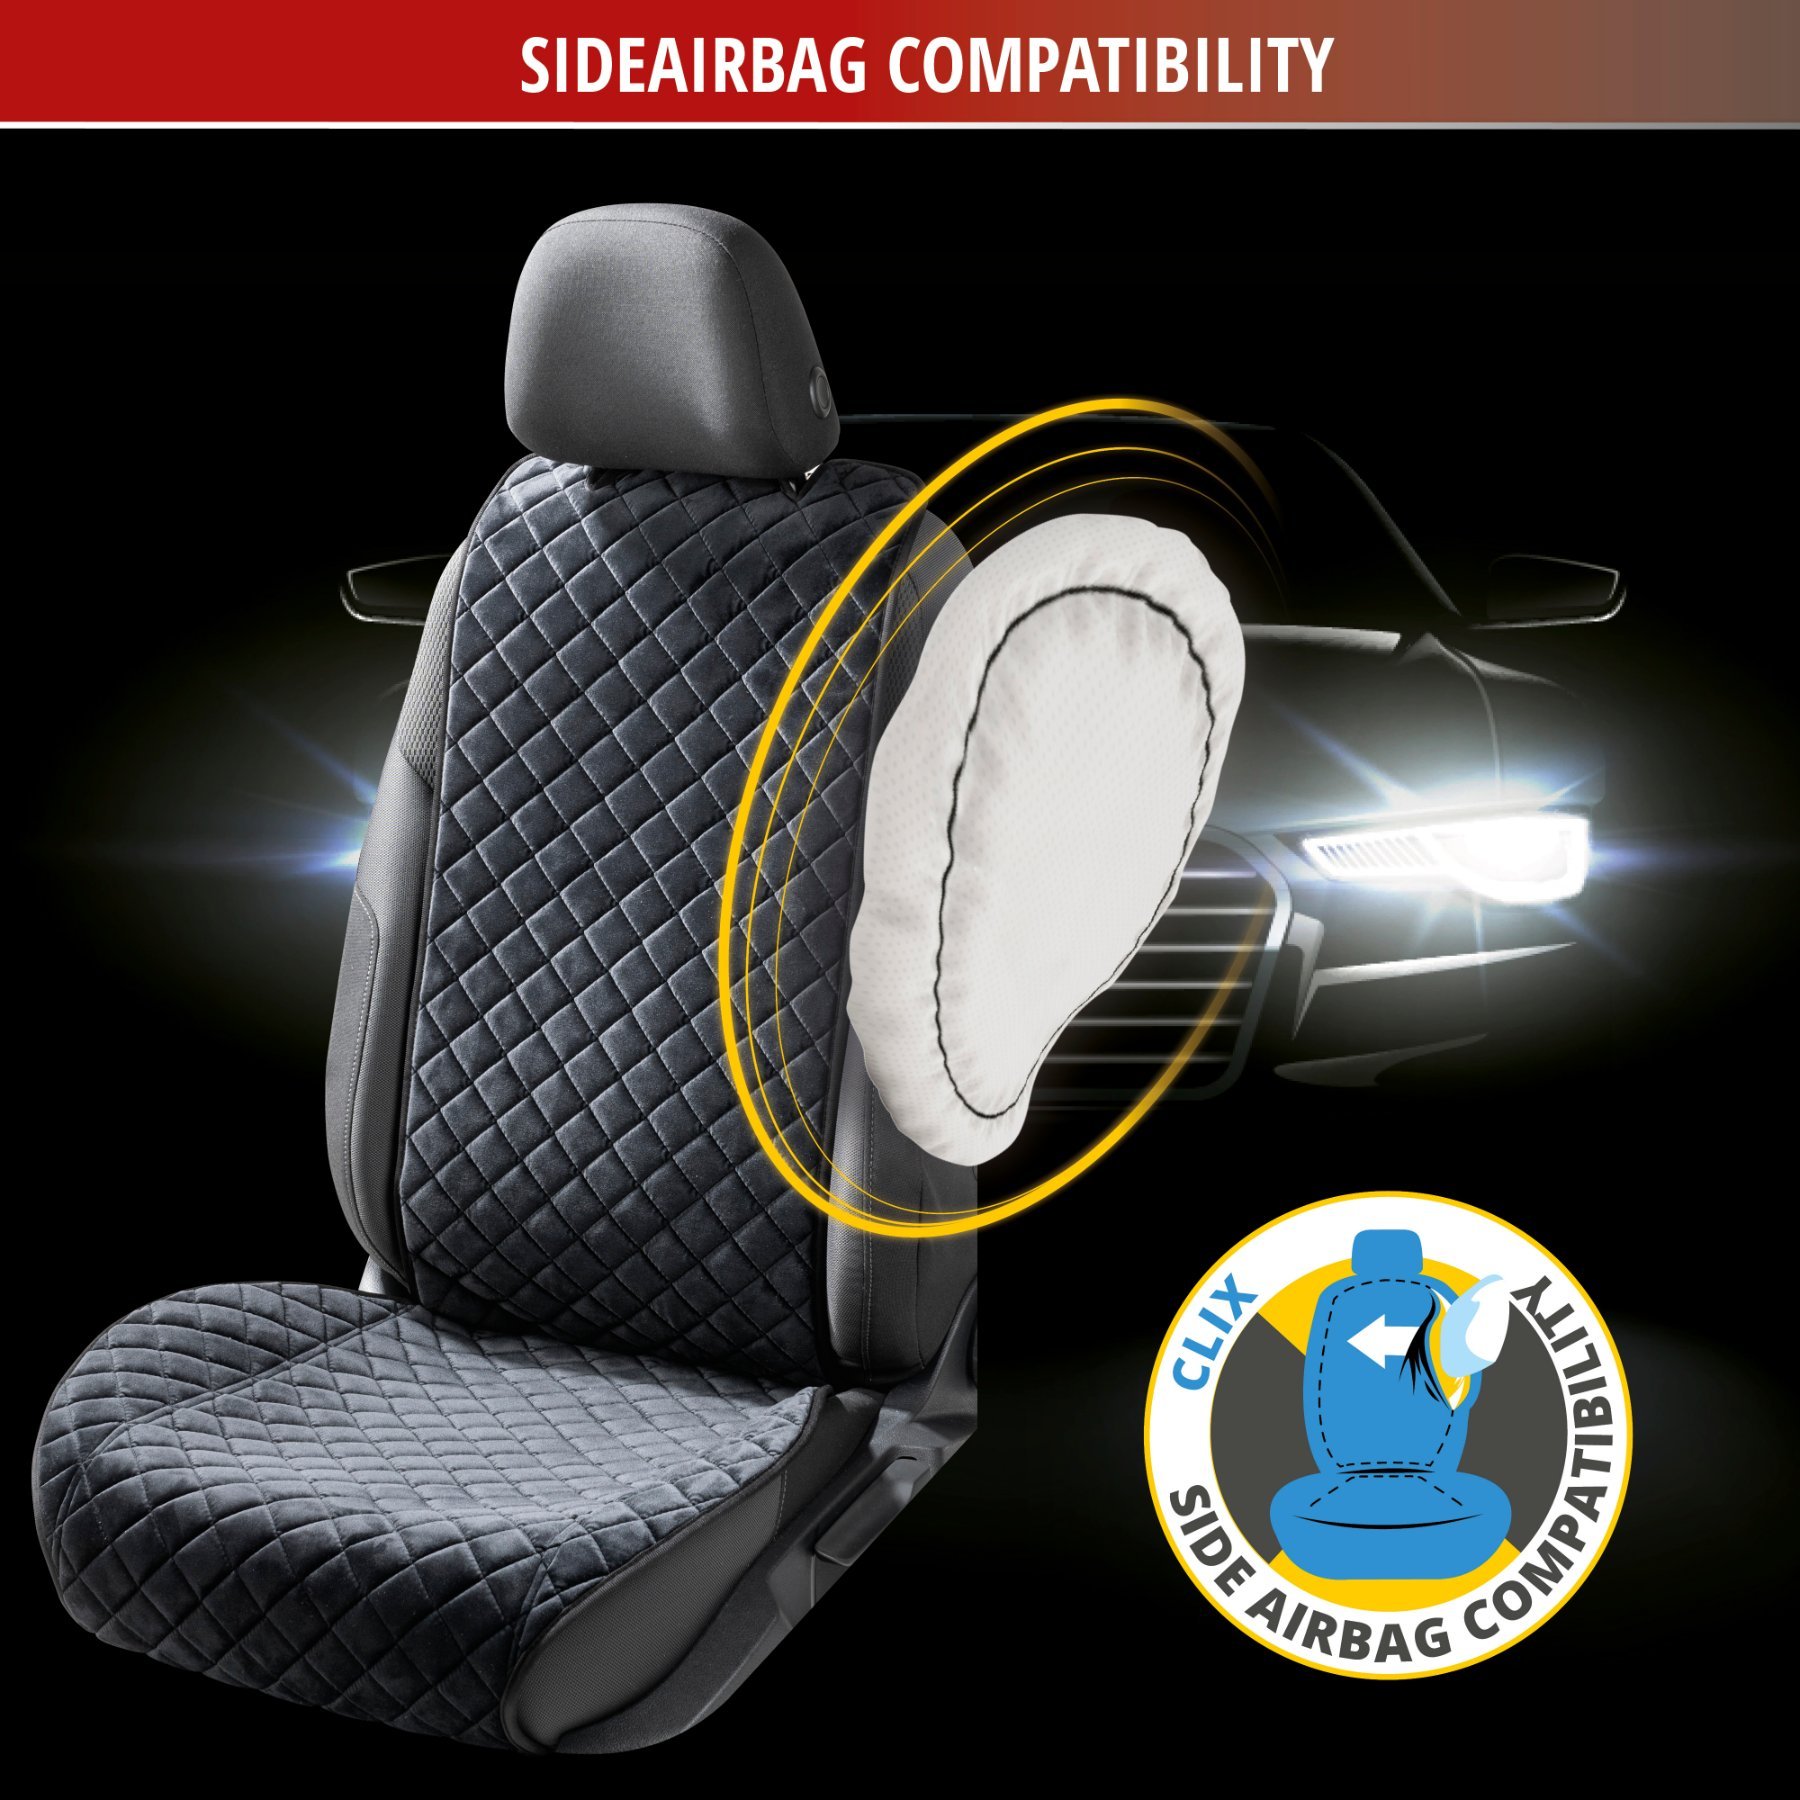 Seat cover Comfortline Luxor, 1 front seat with side bolster protection